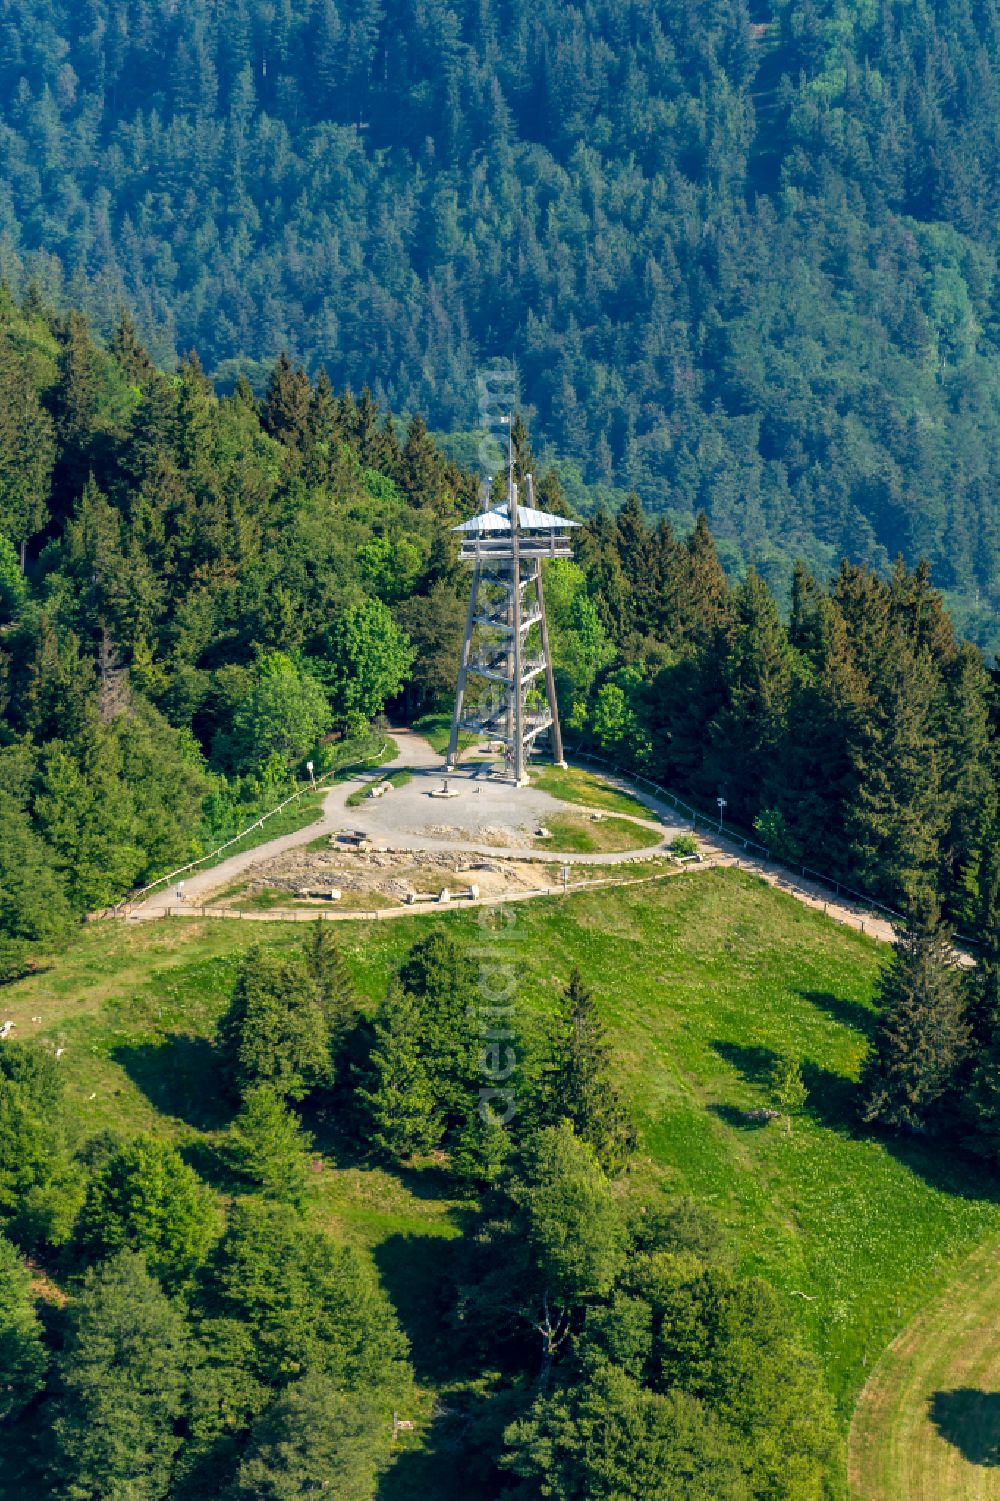 Oberried from above - Structure of the observation tower Schauinsland Turm in Oberried in the state Baden-Wuerttemberg, Germany